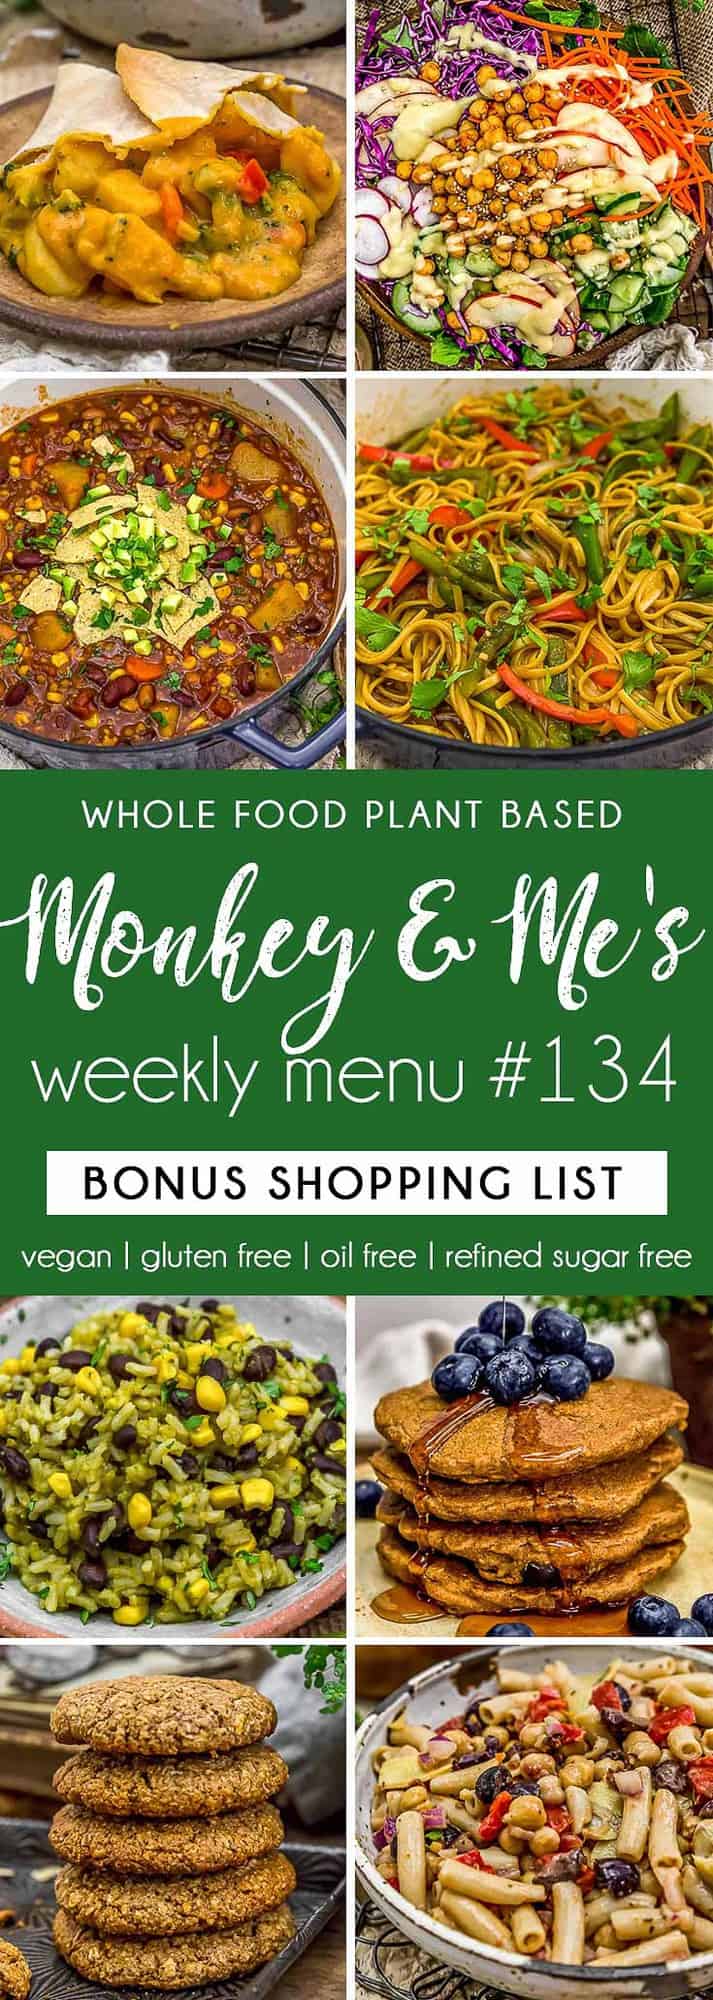 Monkey and Me's Menu 134 featuring 8 recipes